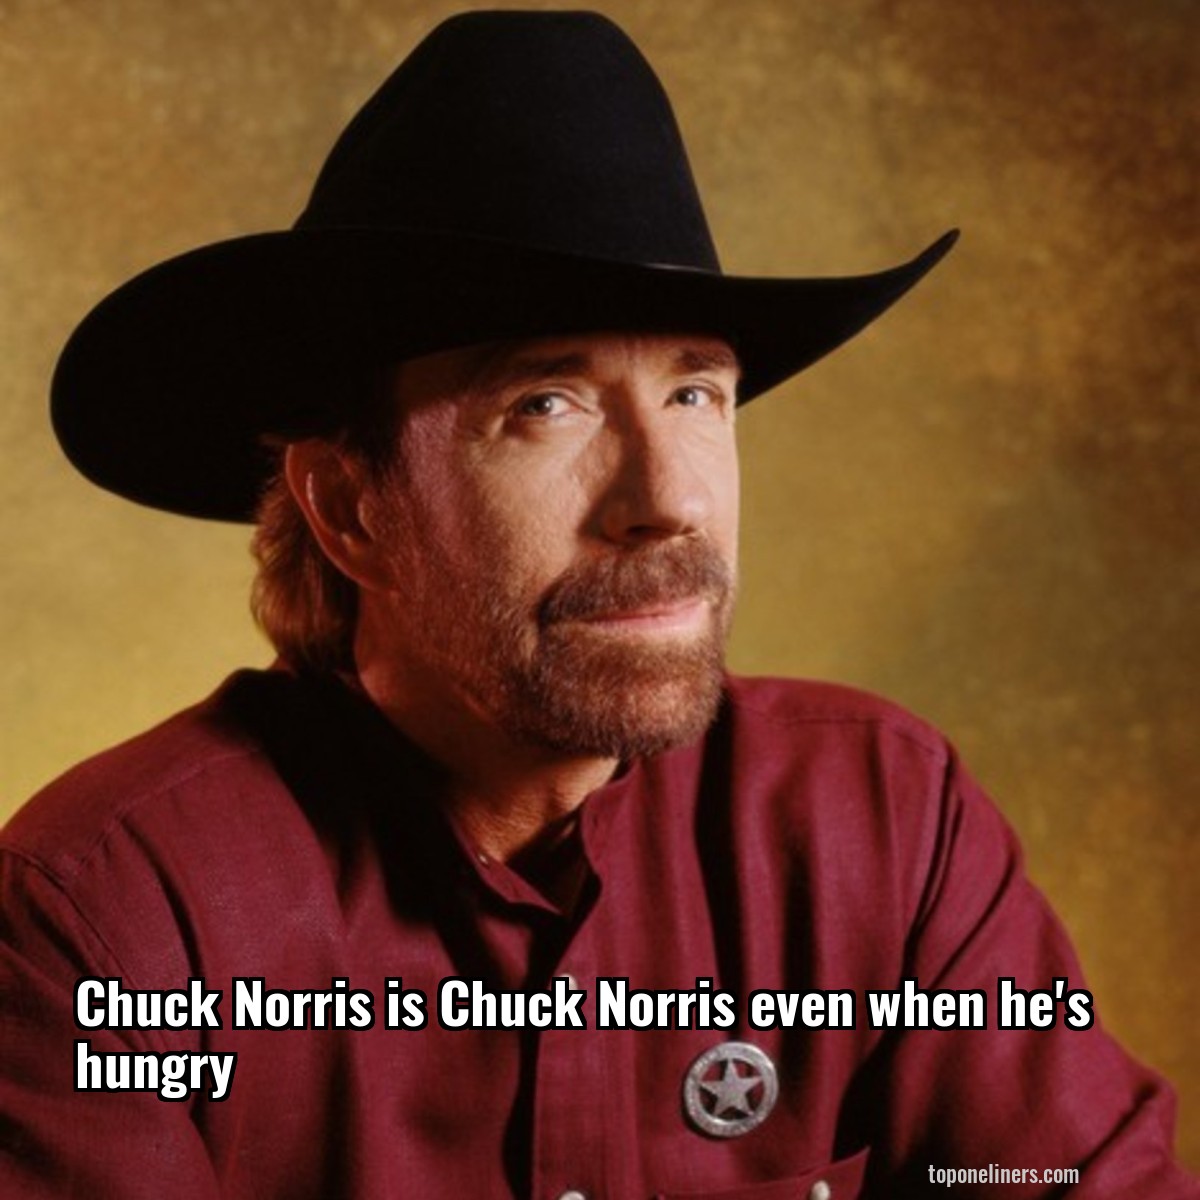 Chuck Norris is Chuck Norris even when he's hungry